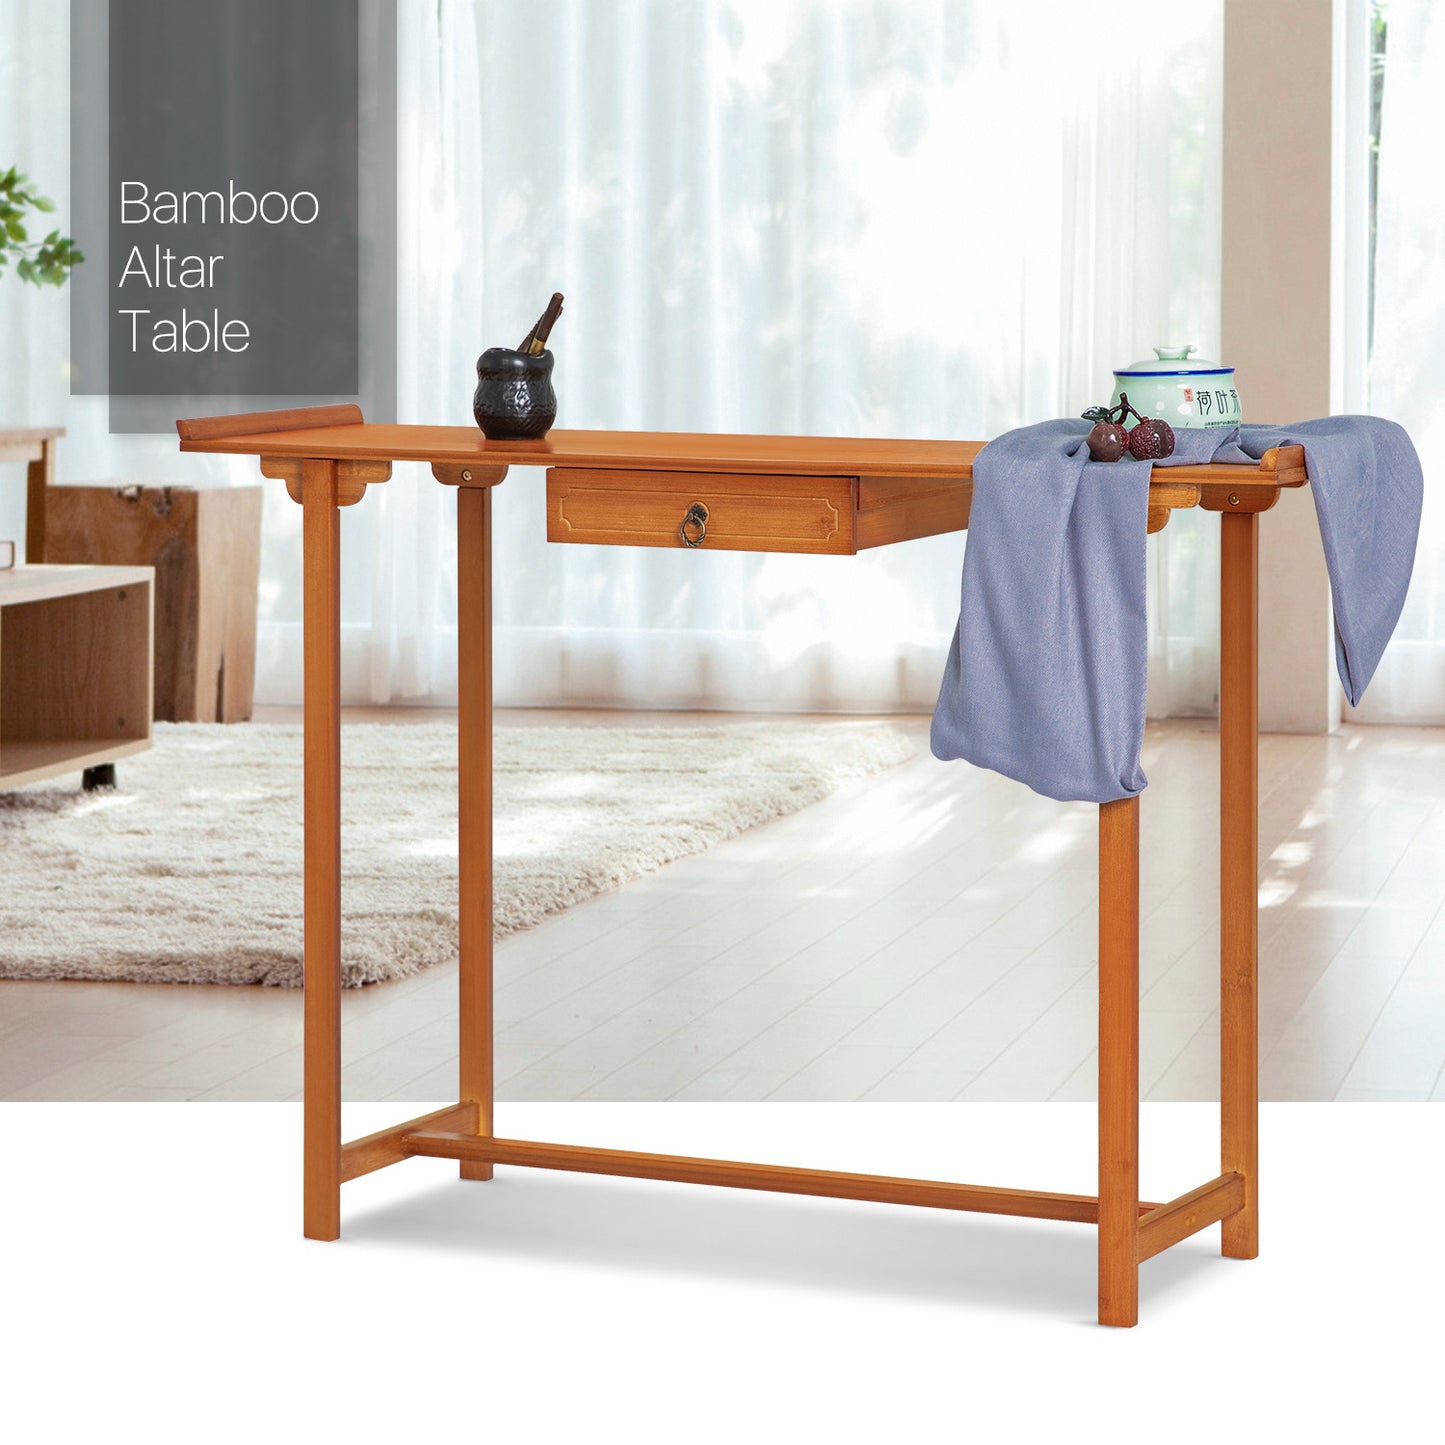 Chinese Altar Table w/Drawer - Brown